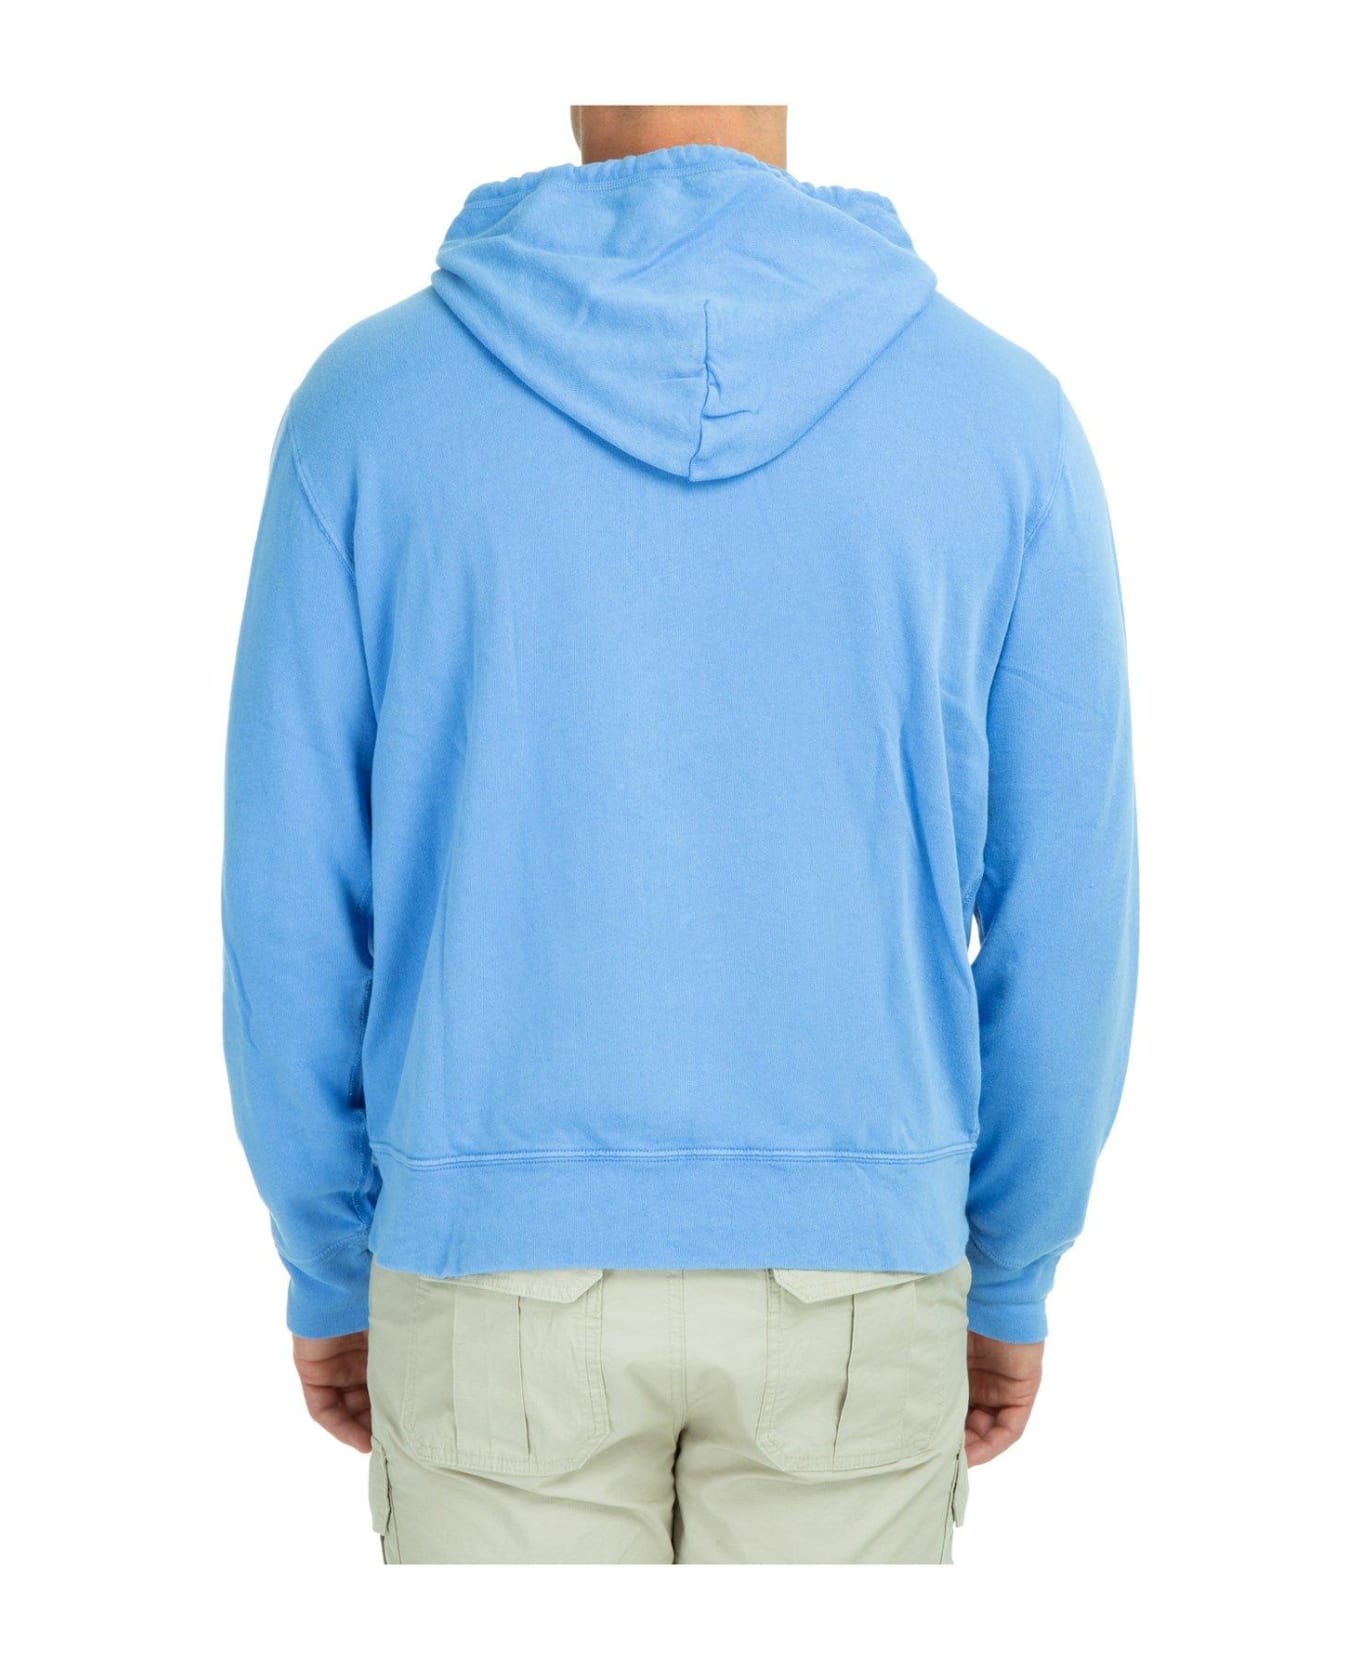 Polo Ralph Lauren Embroidered Pony Zipped Hoodie - Clear Blue フリース